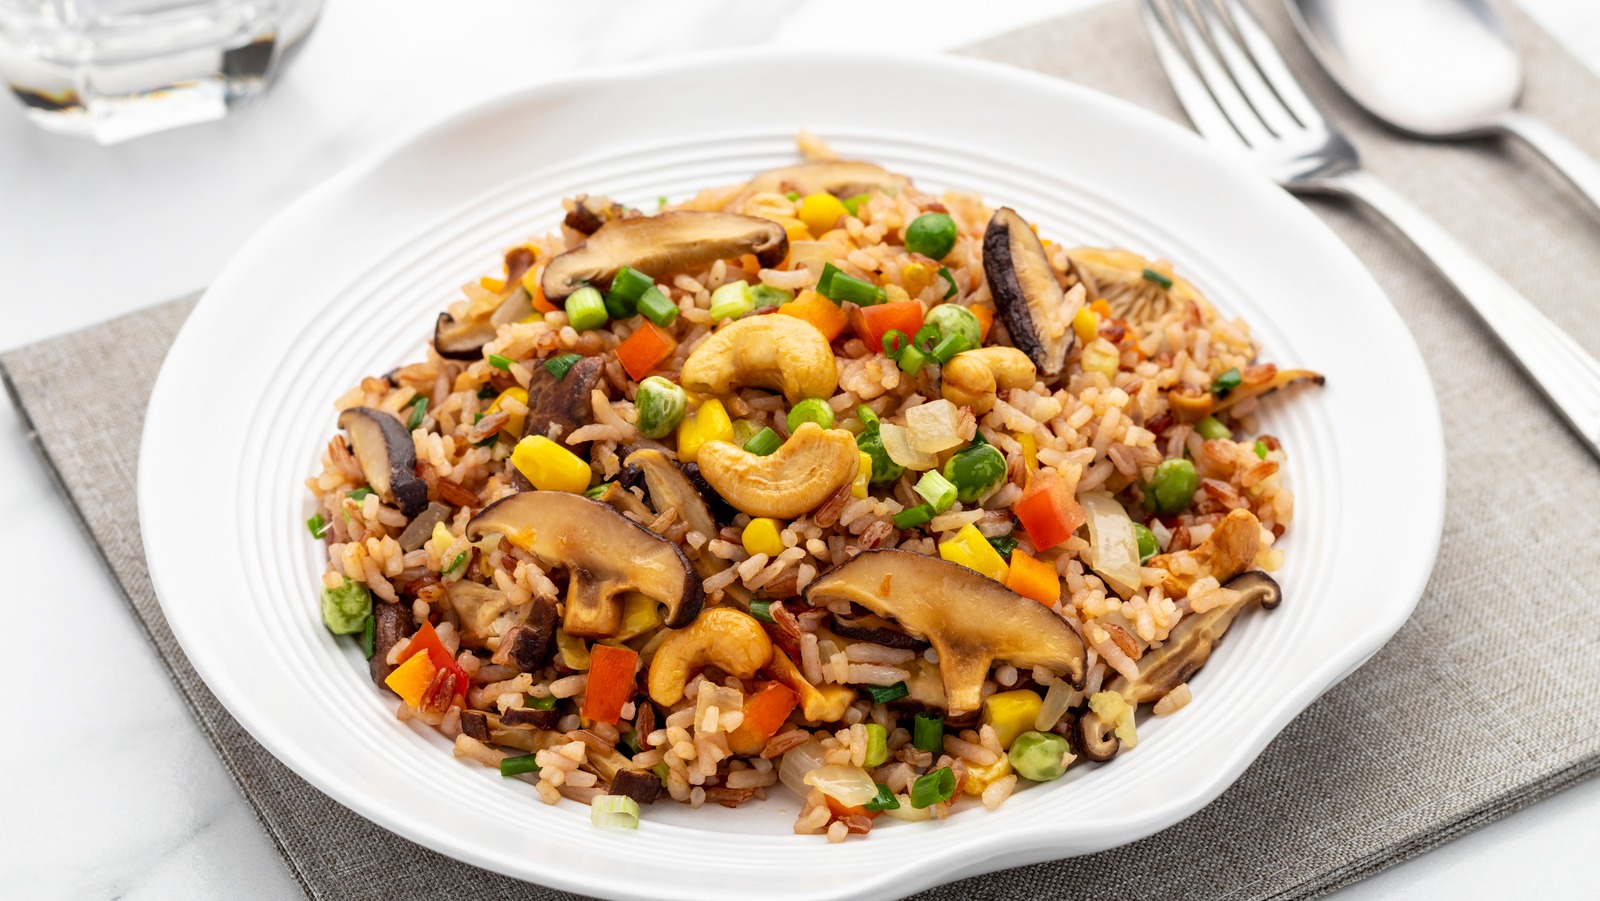 Give Fried Rice Dishes A Kick With Trader Joe's Thai Lime & Chili Cashews